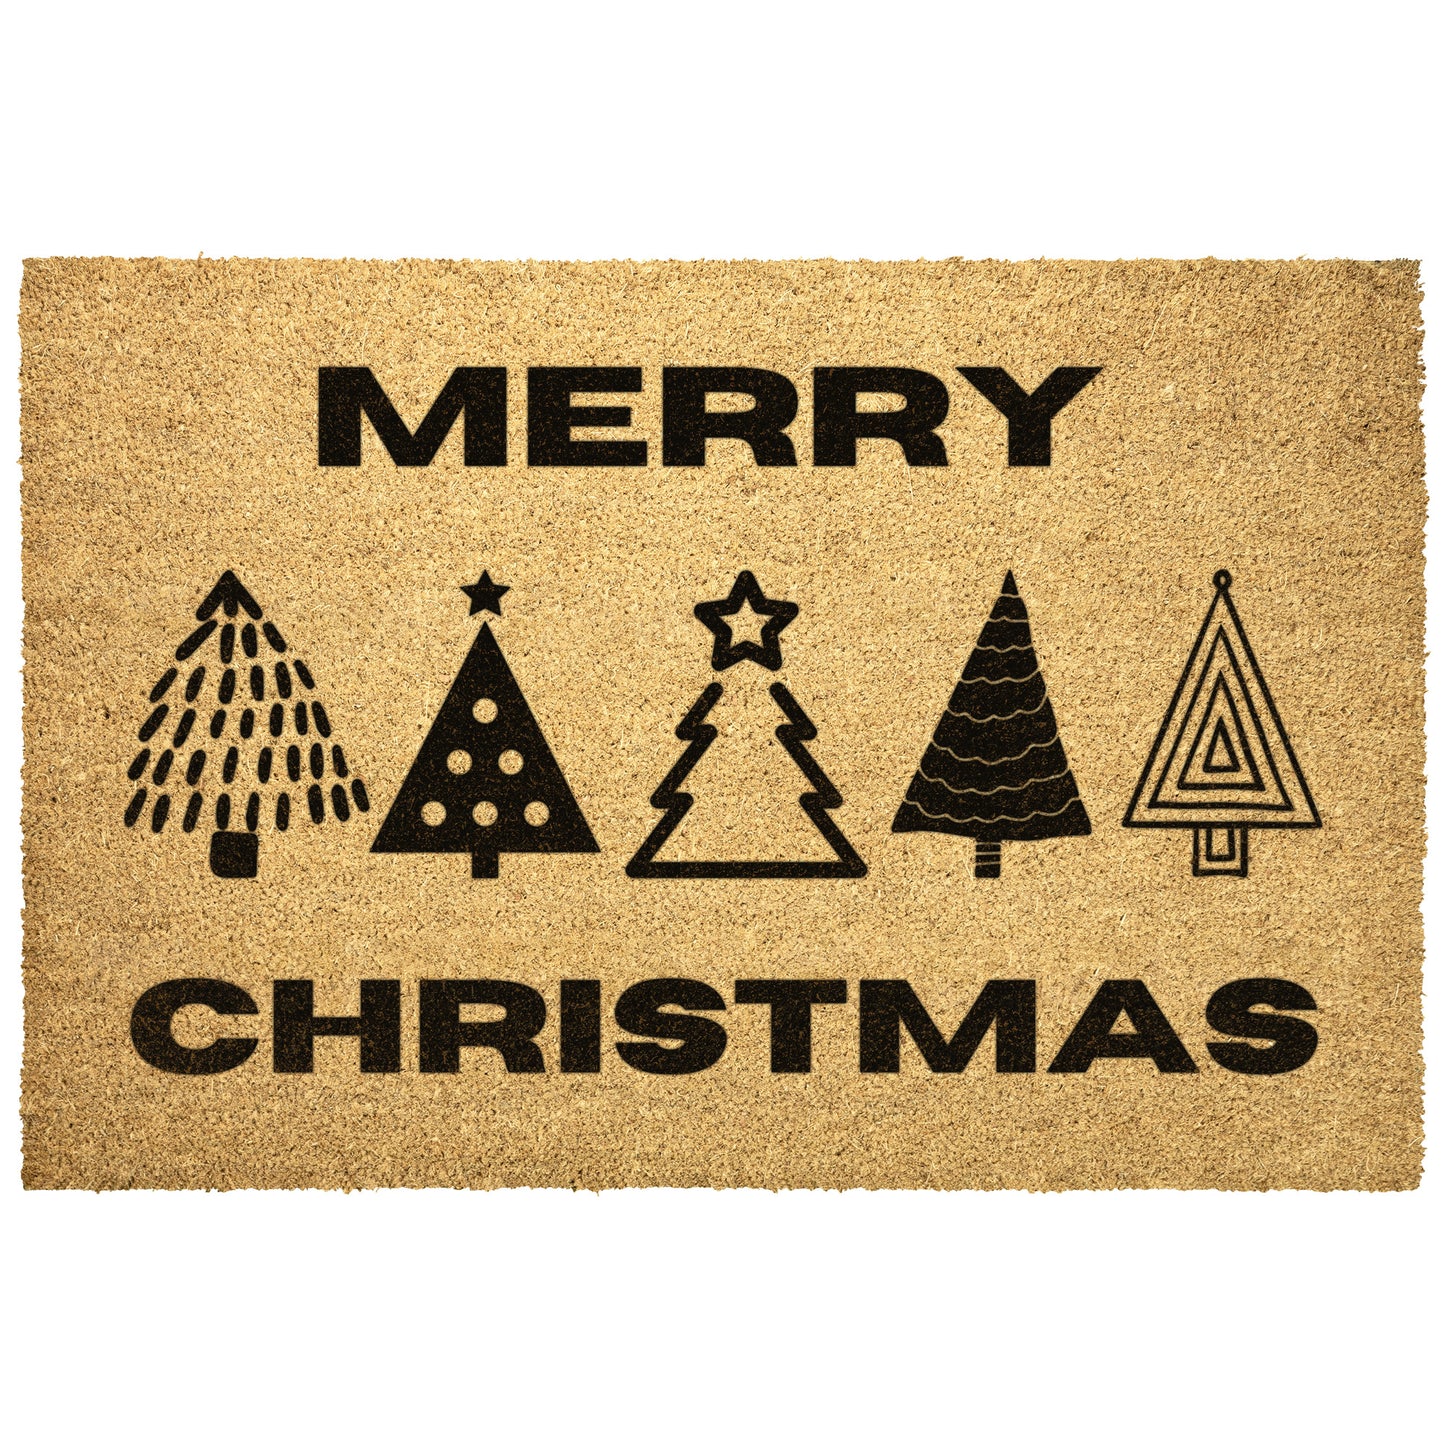 Merry Christmas Doormat, Holiday Porch Decor, Christmas Mat for Front Door